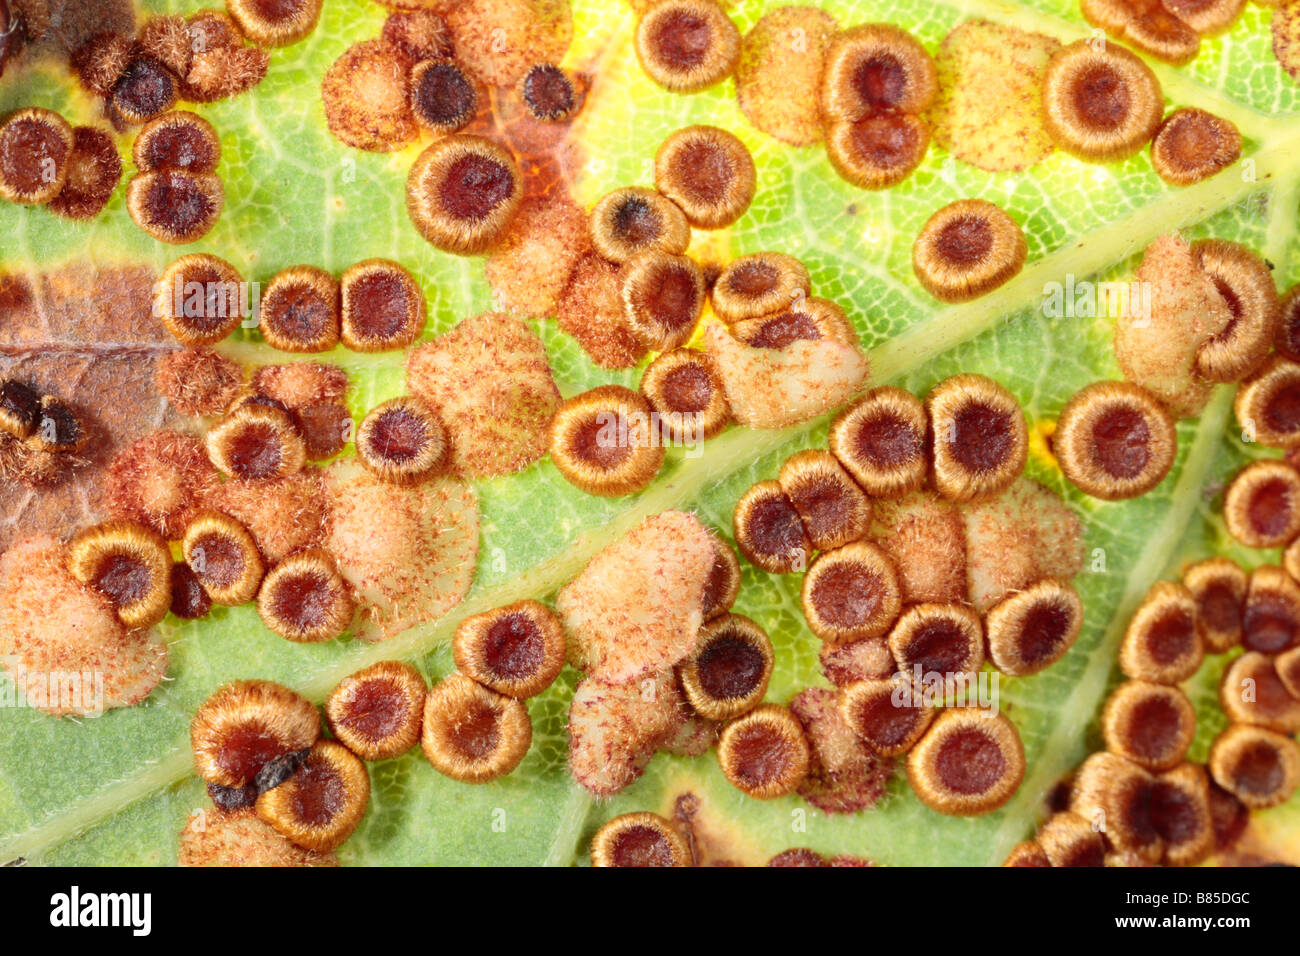 Mixed Spangle (Neuroterus quercusbaccarum) and Silk button Galls (N. numismalis) on an Oak leaf. Powys, Wales, UK. Stock Photo